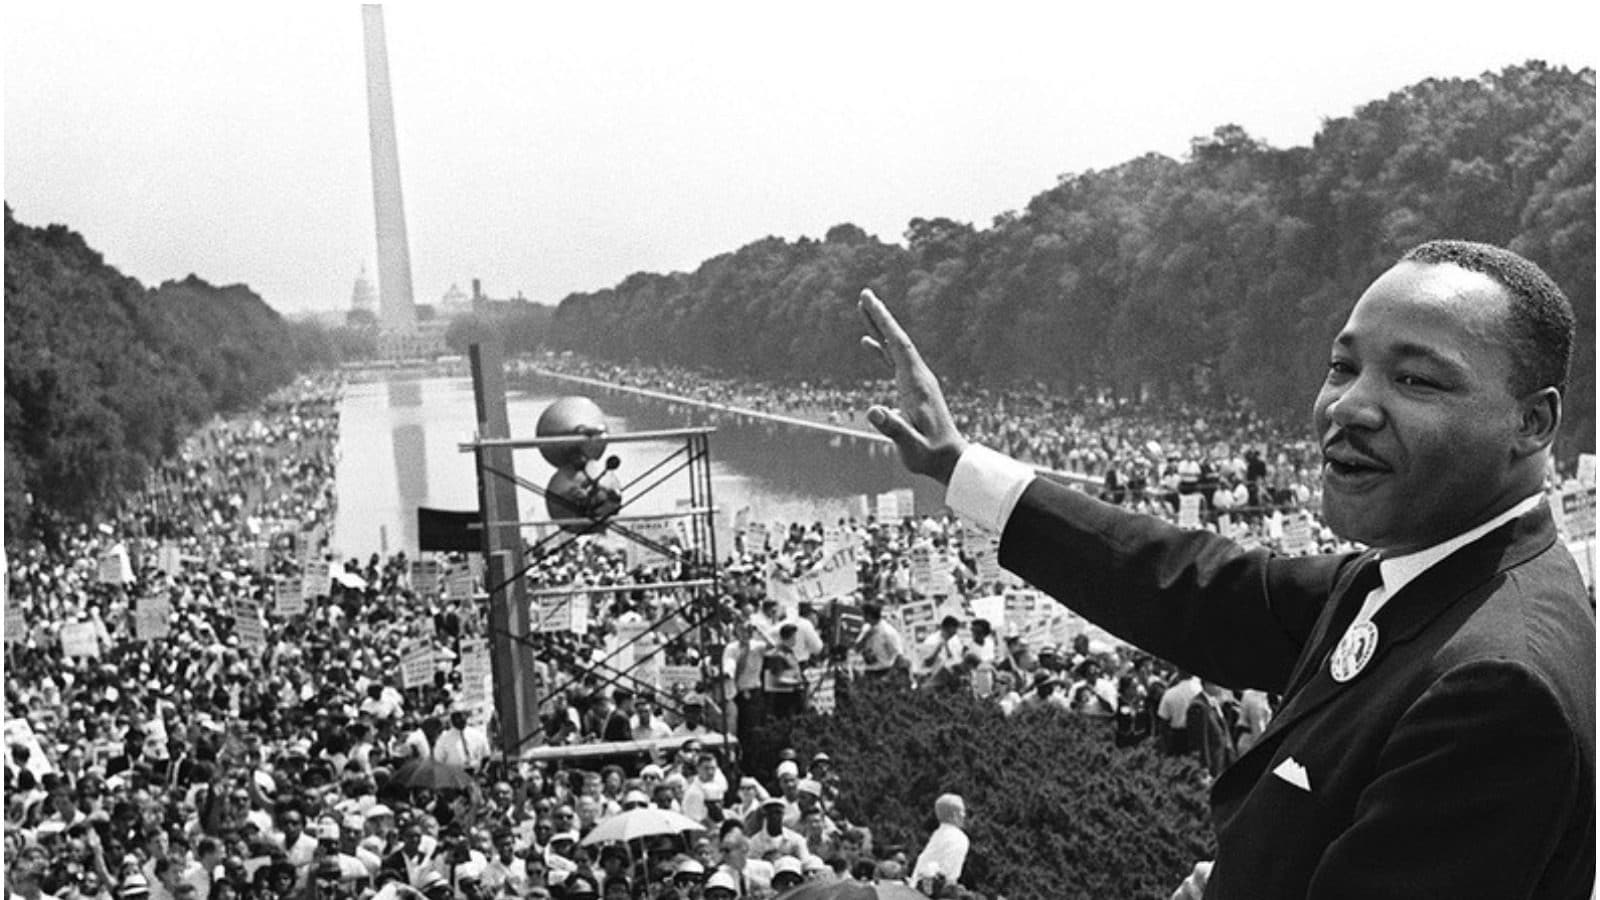 summary of martin luther king i have a dream speech